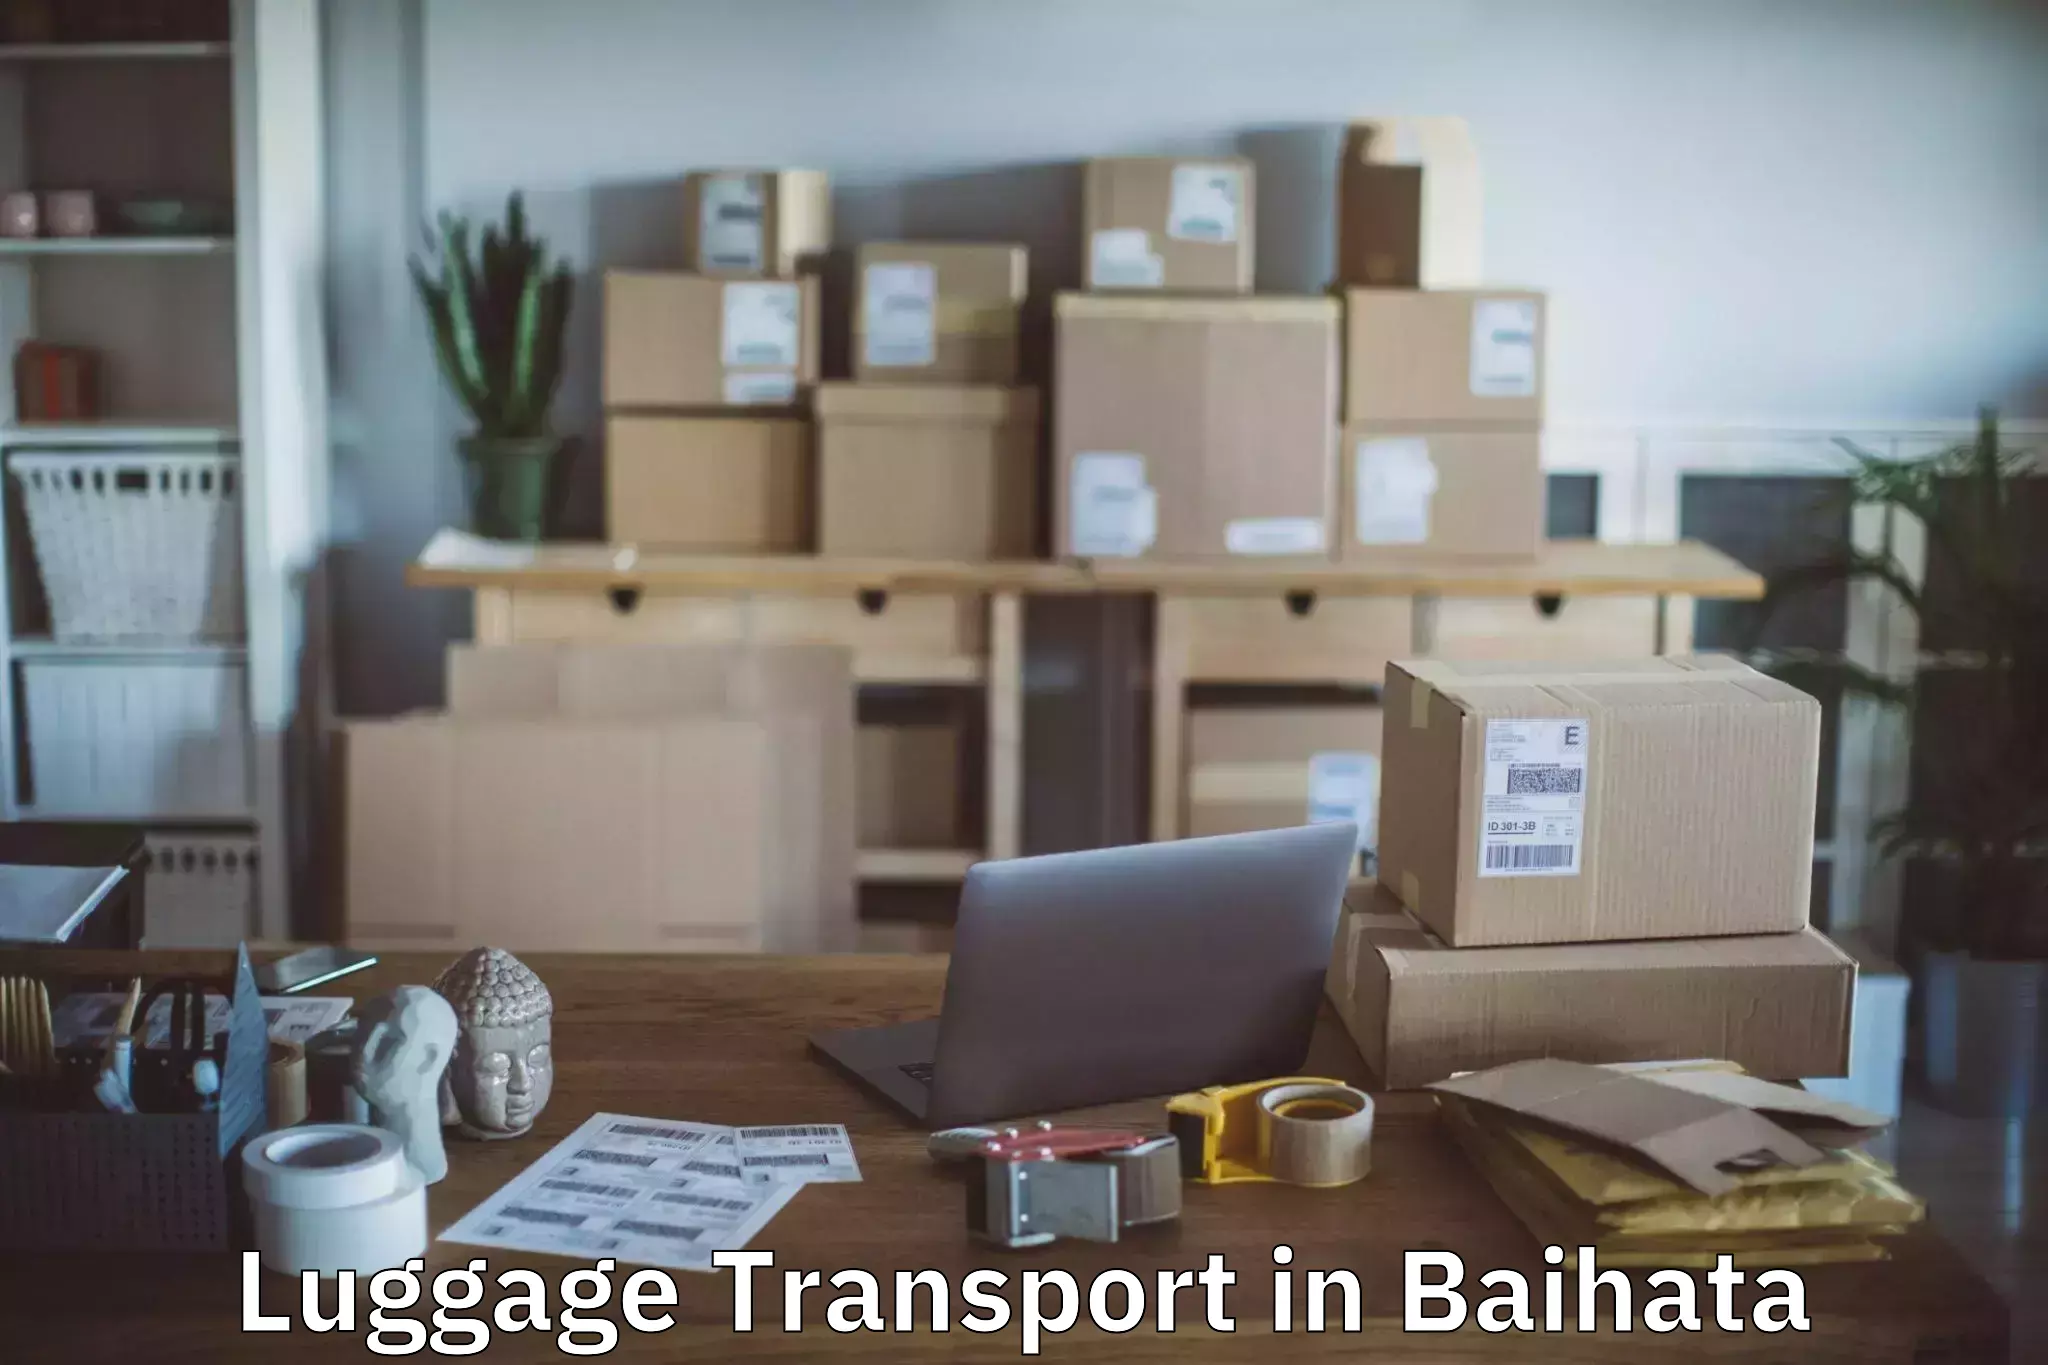 Business luggage transport in Baihata